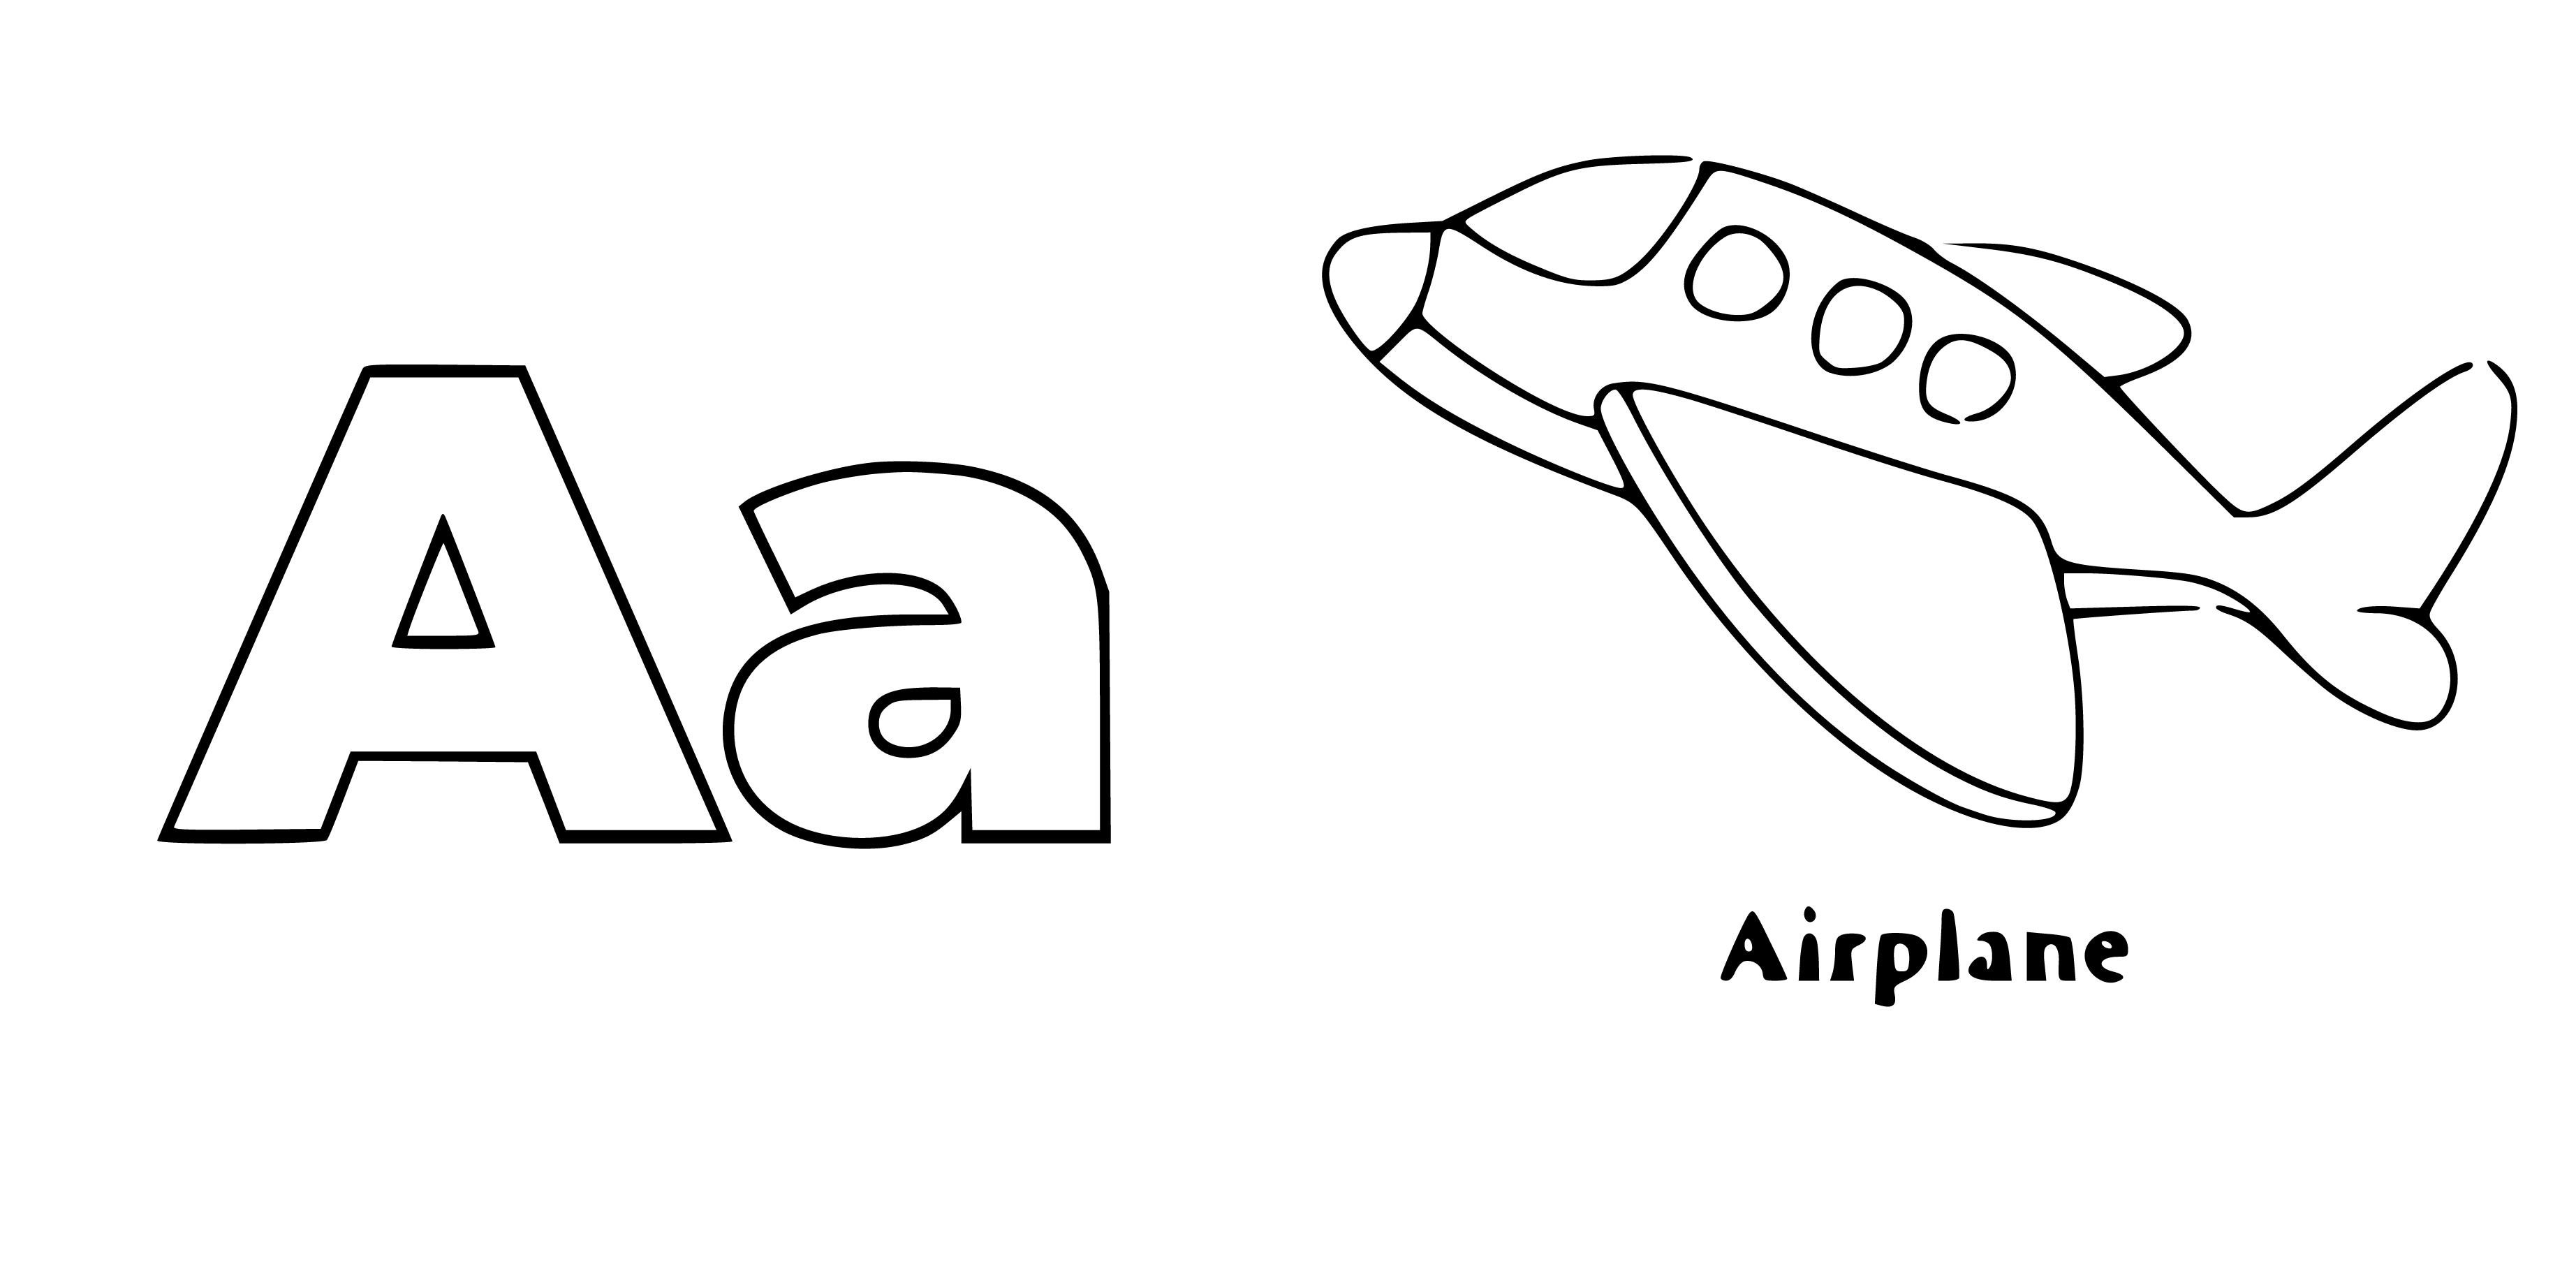 Letter A Coloring Page (airplane) - SheetalColor.com